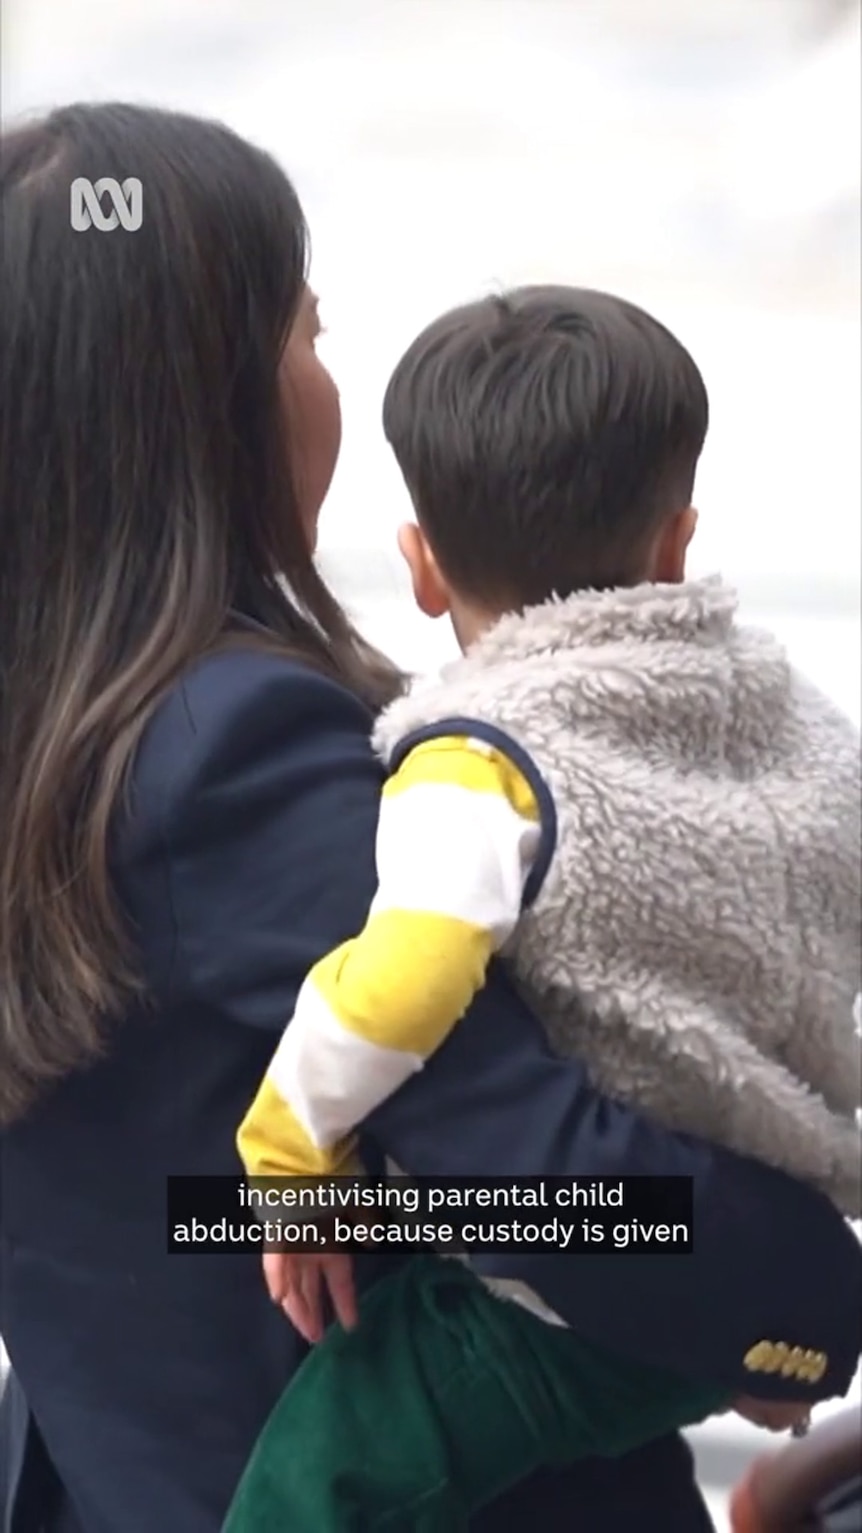 Asian woman with long black hair holding child — shown from behind